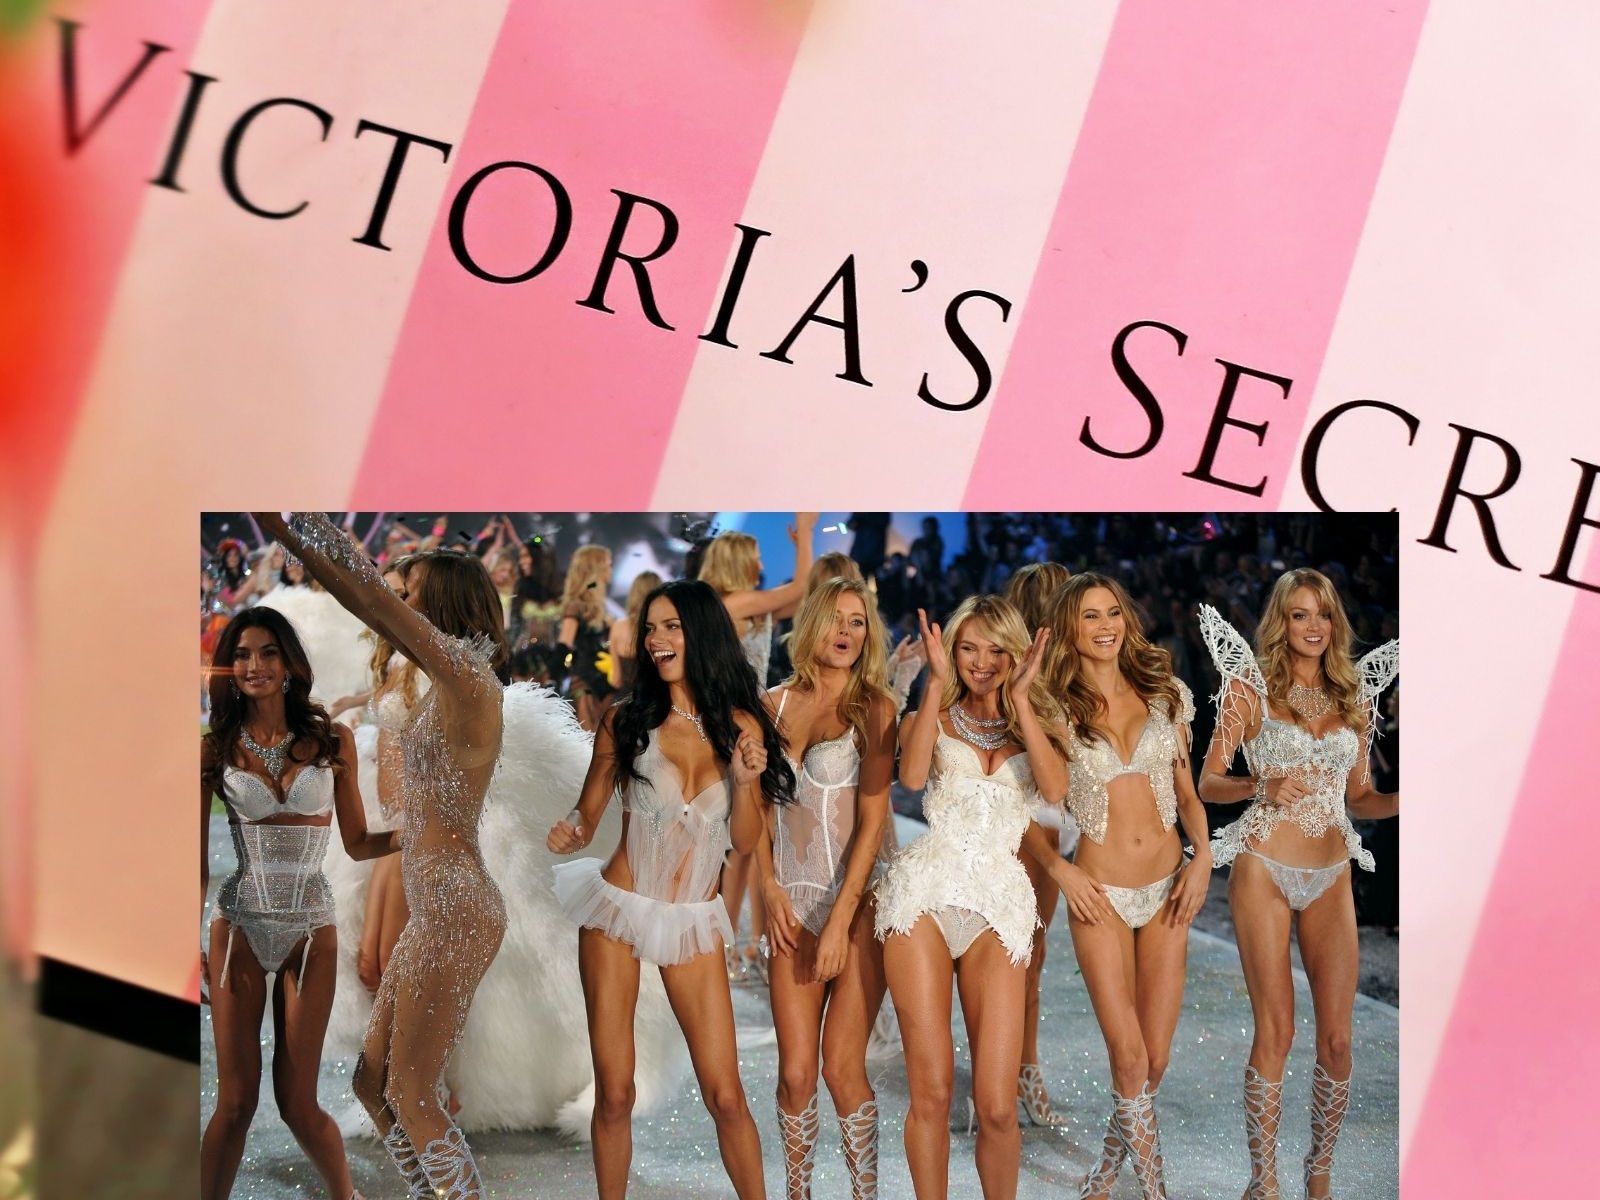 21 Plus Size Models That Can Elevate The Victoria's Secret Runway Show